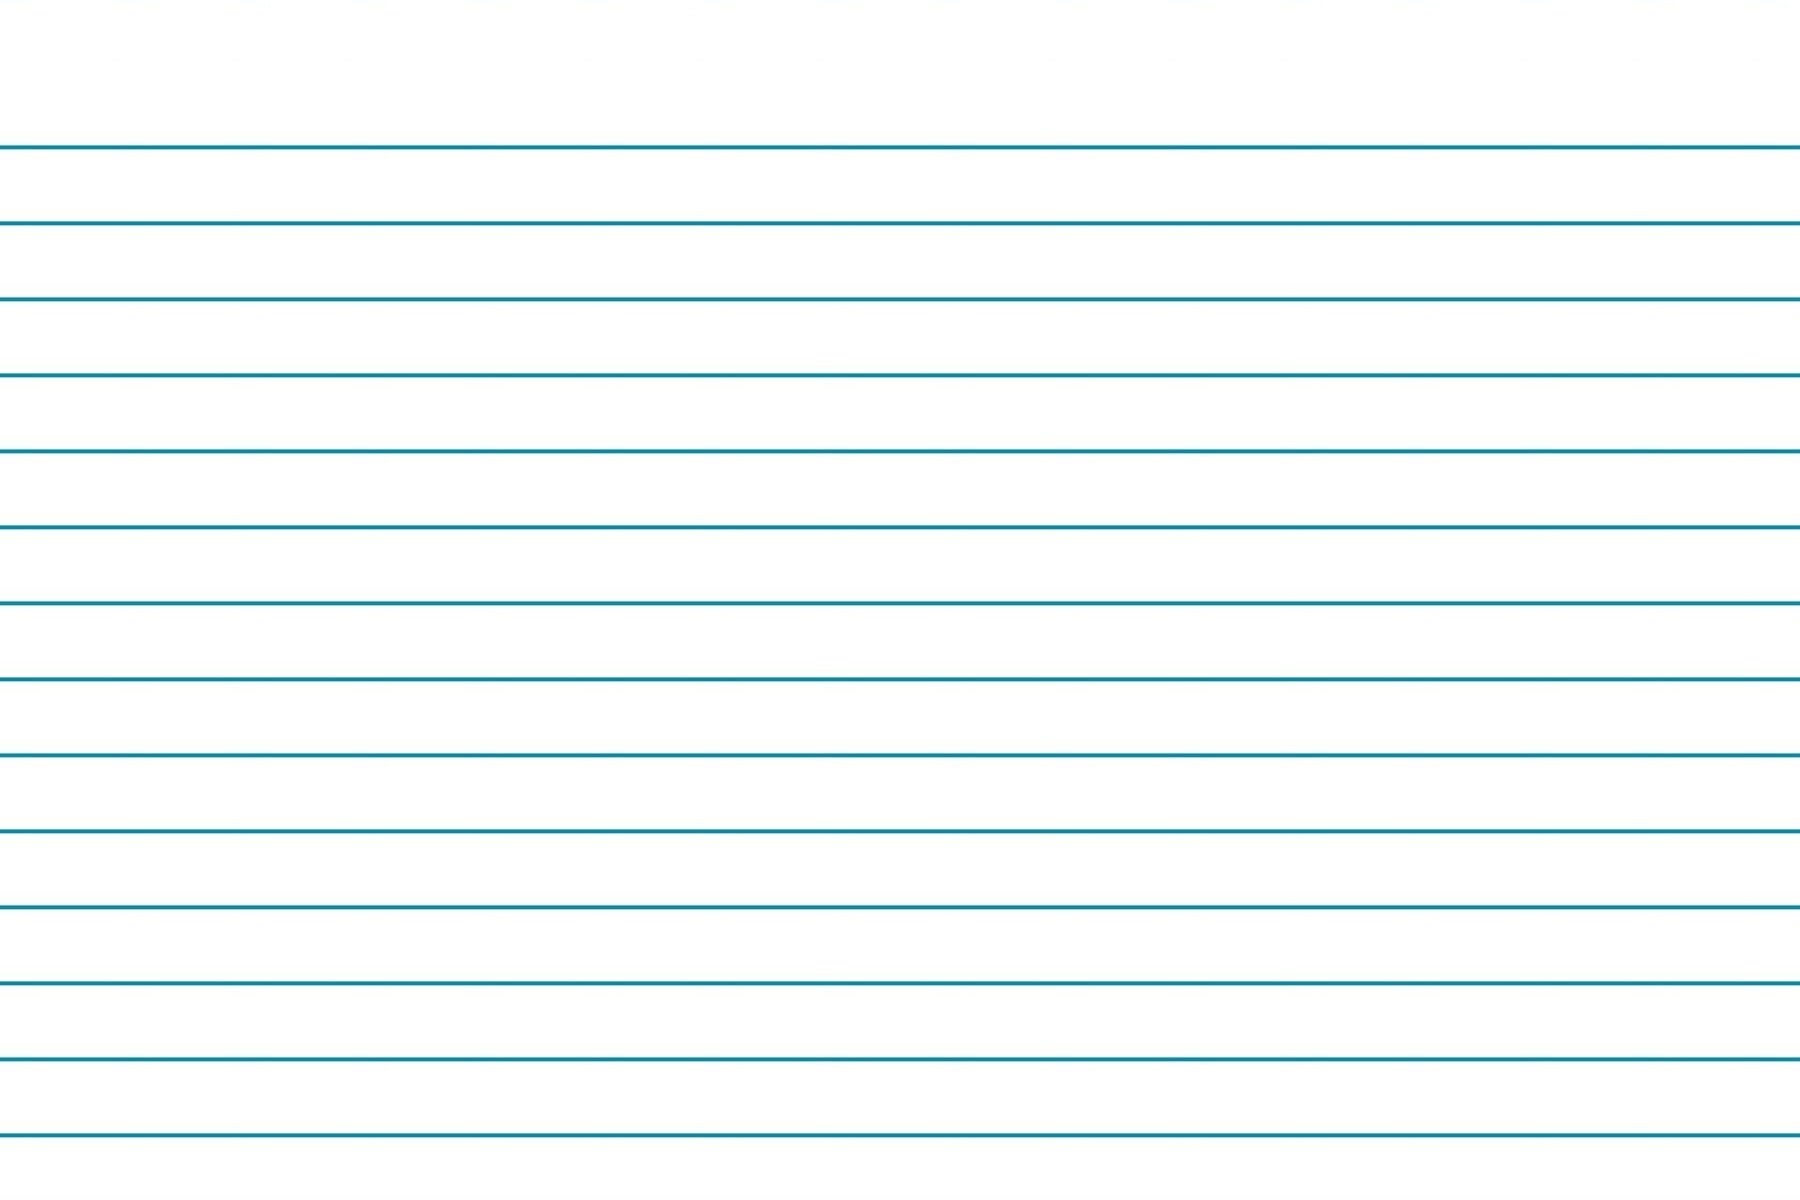 Blank Index Card Template Throughout 3 By 5 Index Card Template